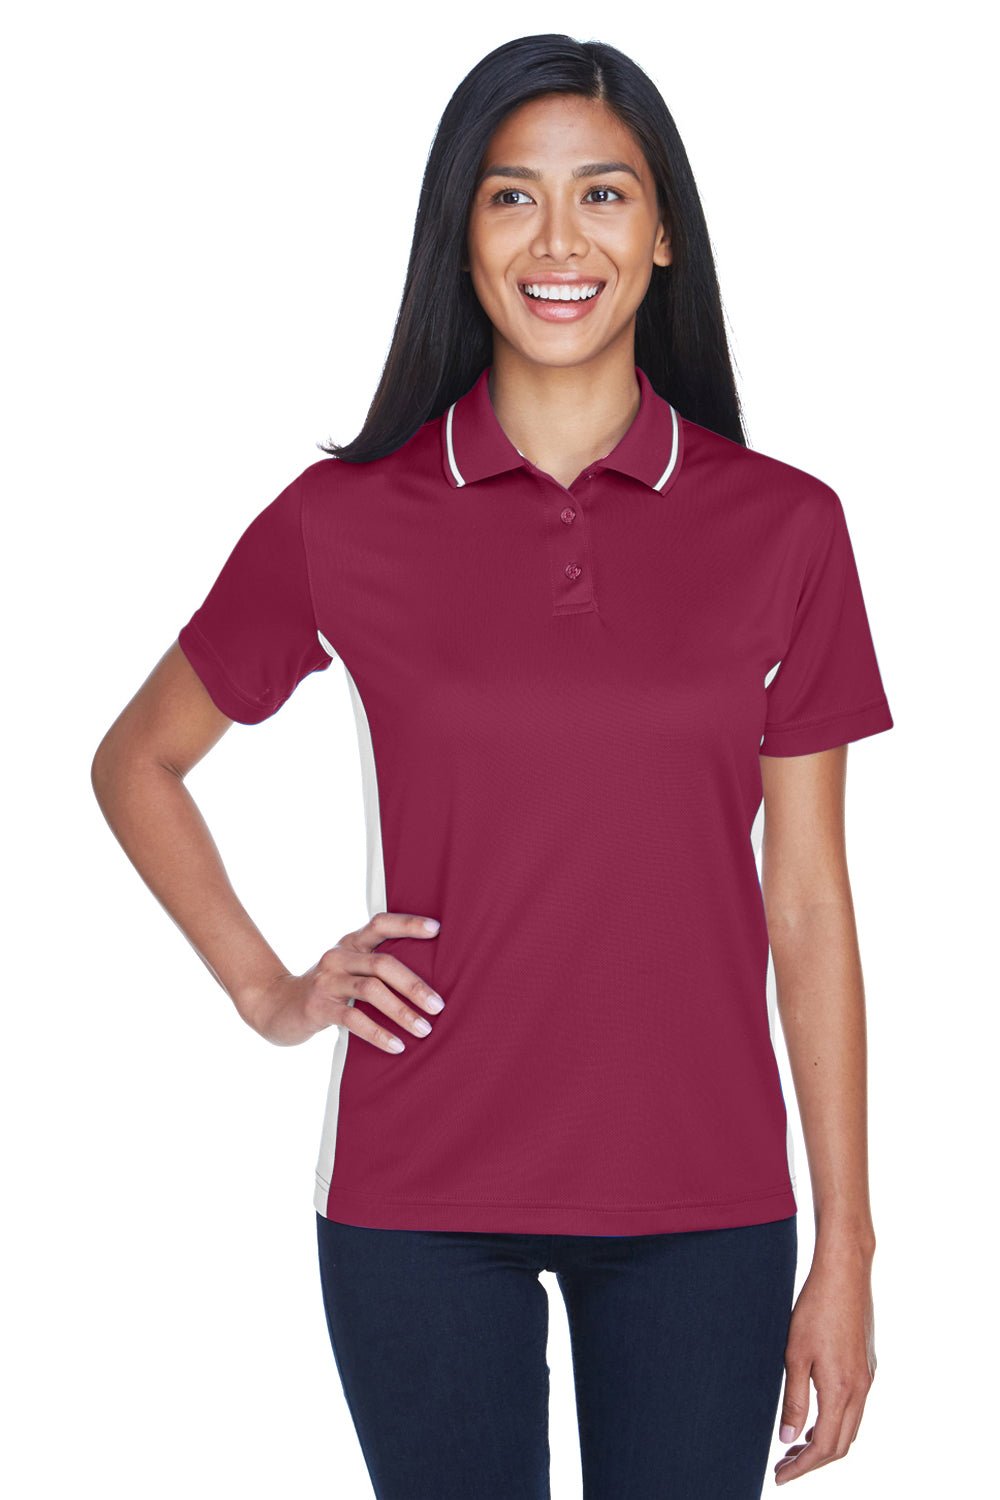 UltraClub 8406L Womens Cool & Dry Moisture Wicking Short Sleeve Polo Shirt Maroon/White Front